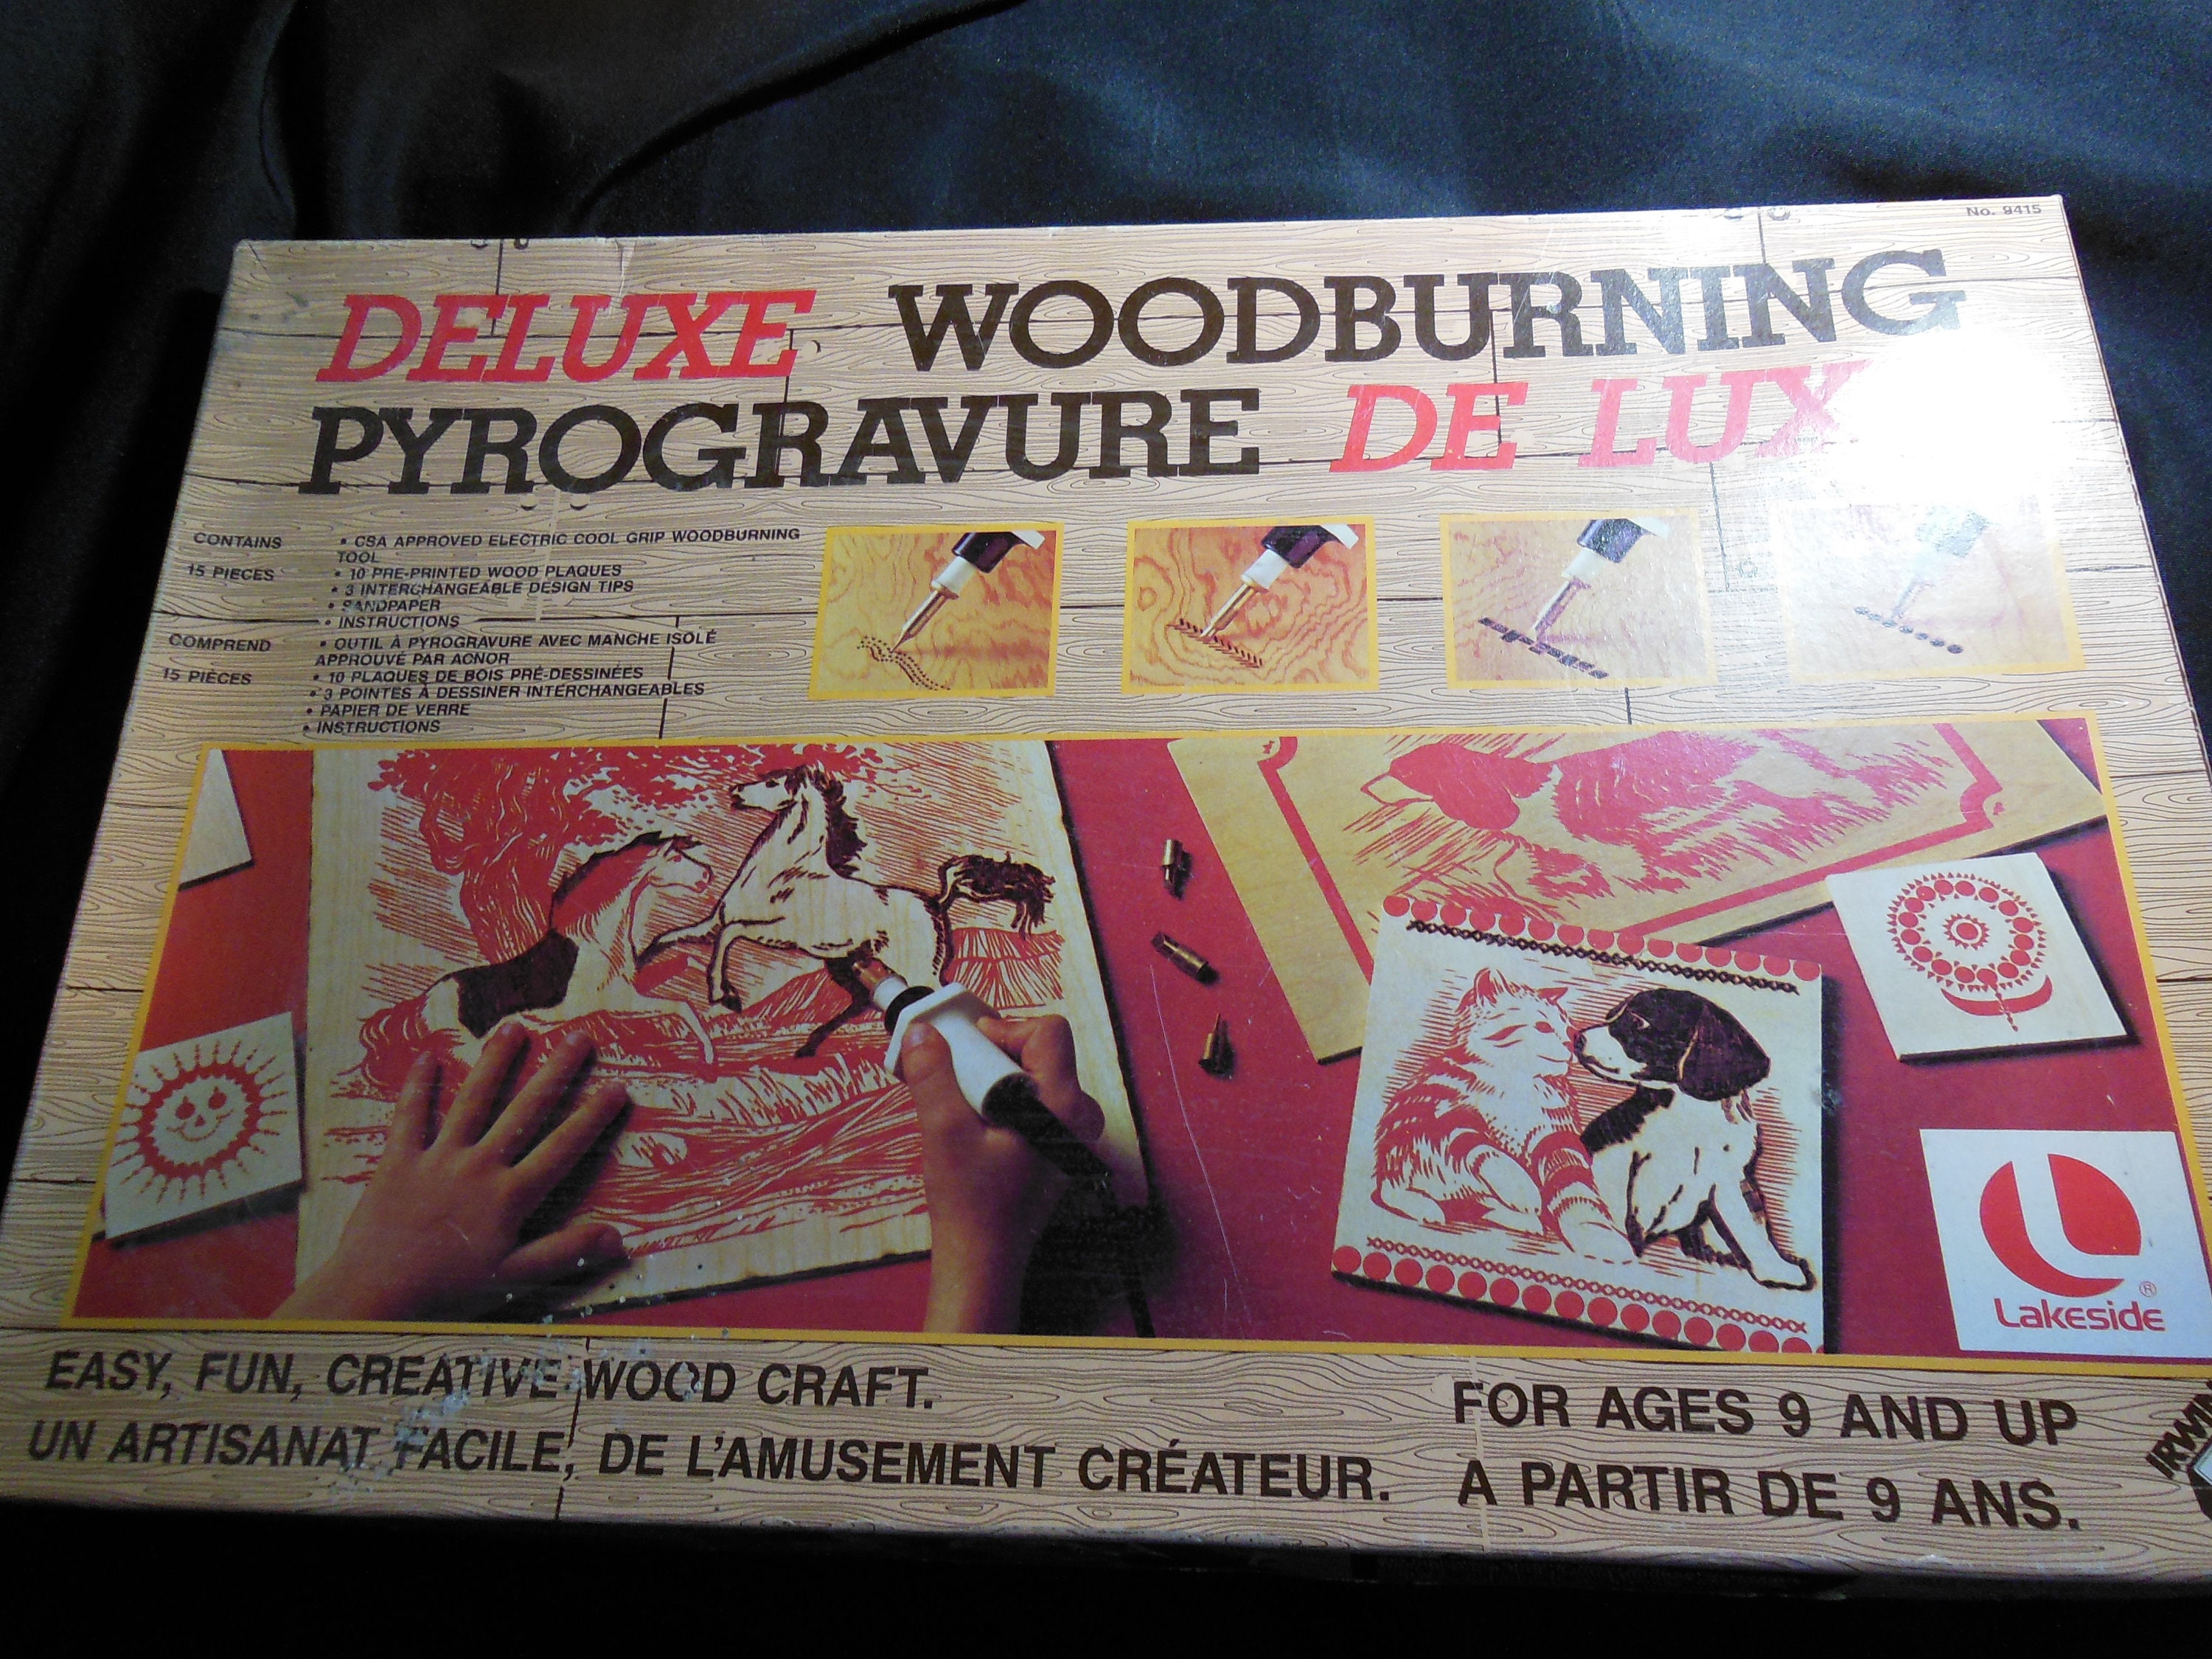 Child Of The 80s & 90s - Wood Burning Kit. They thought it was a